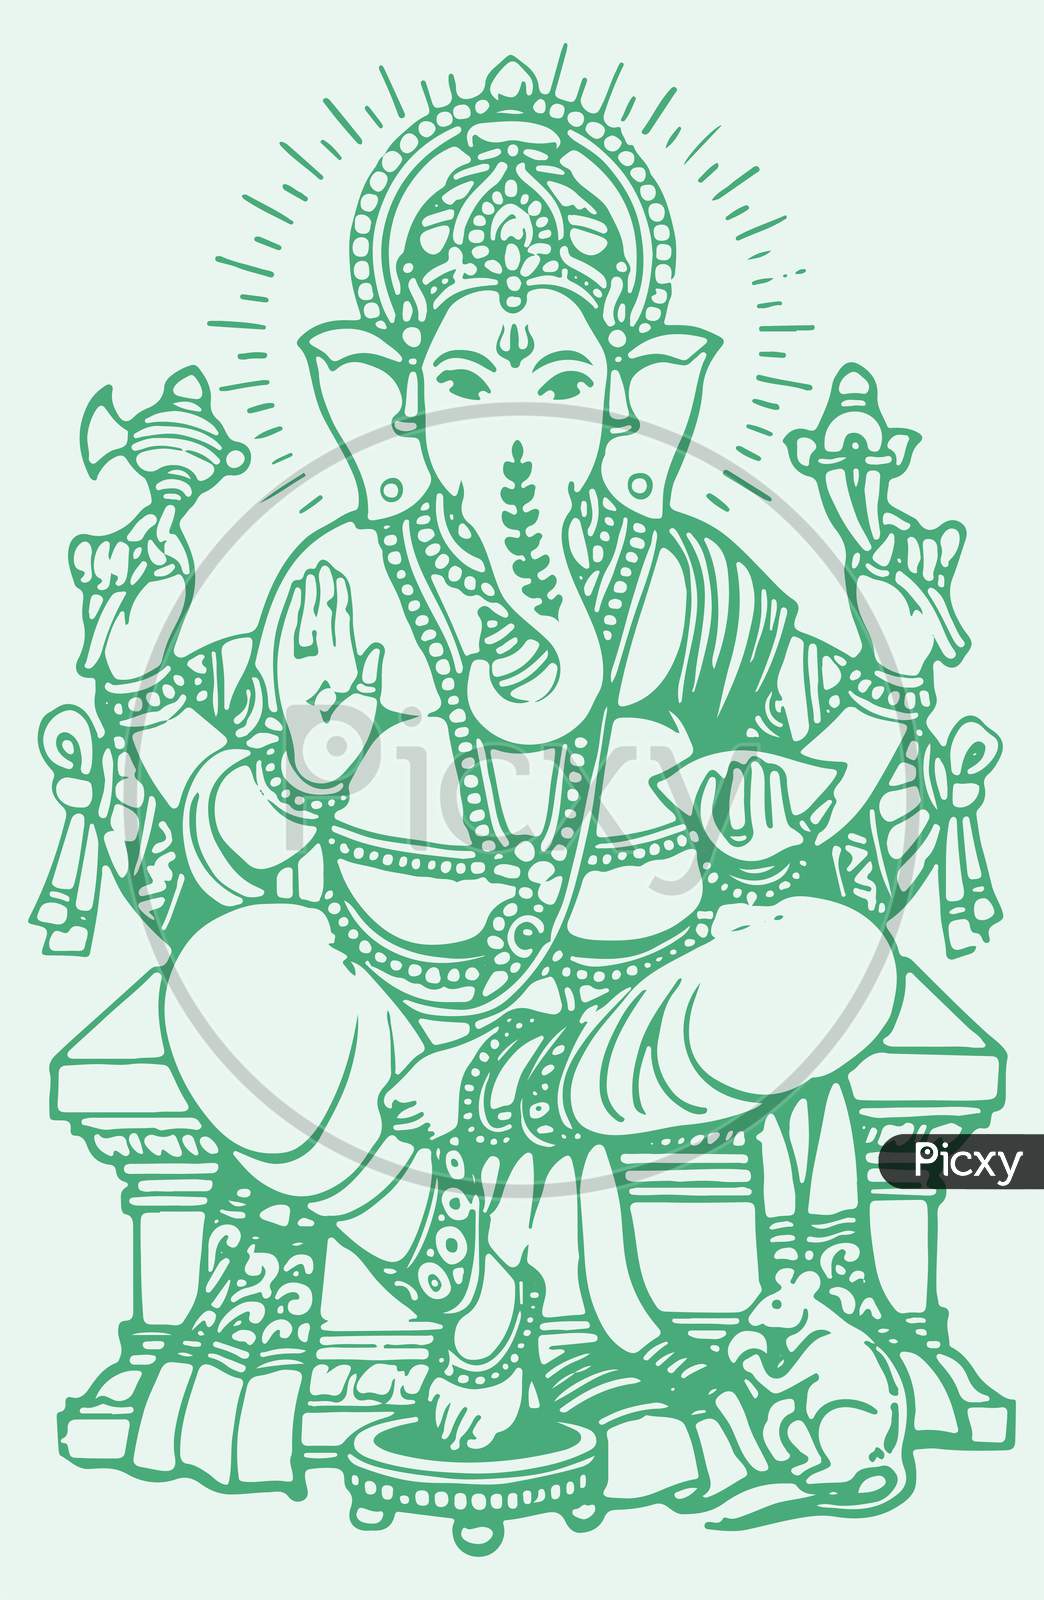 1544 Ganesh Chaturthi Sketch Images Stock Photos  Vectors  Shutterstock